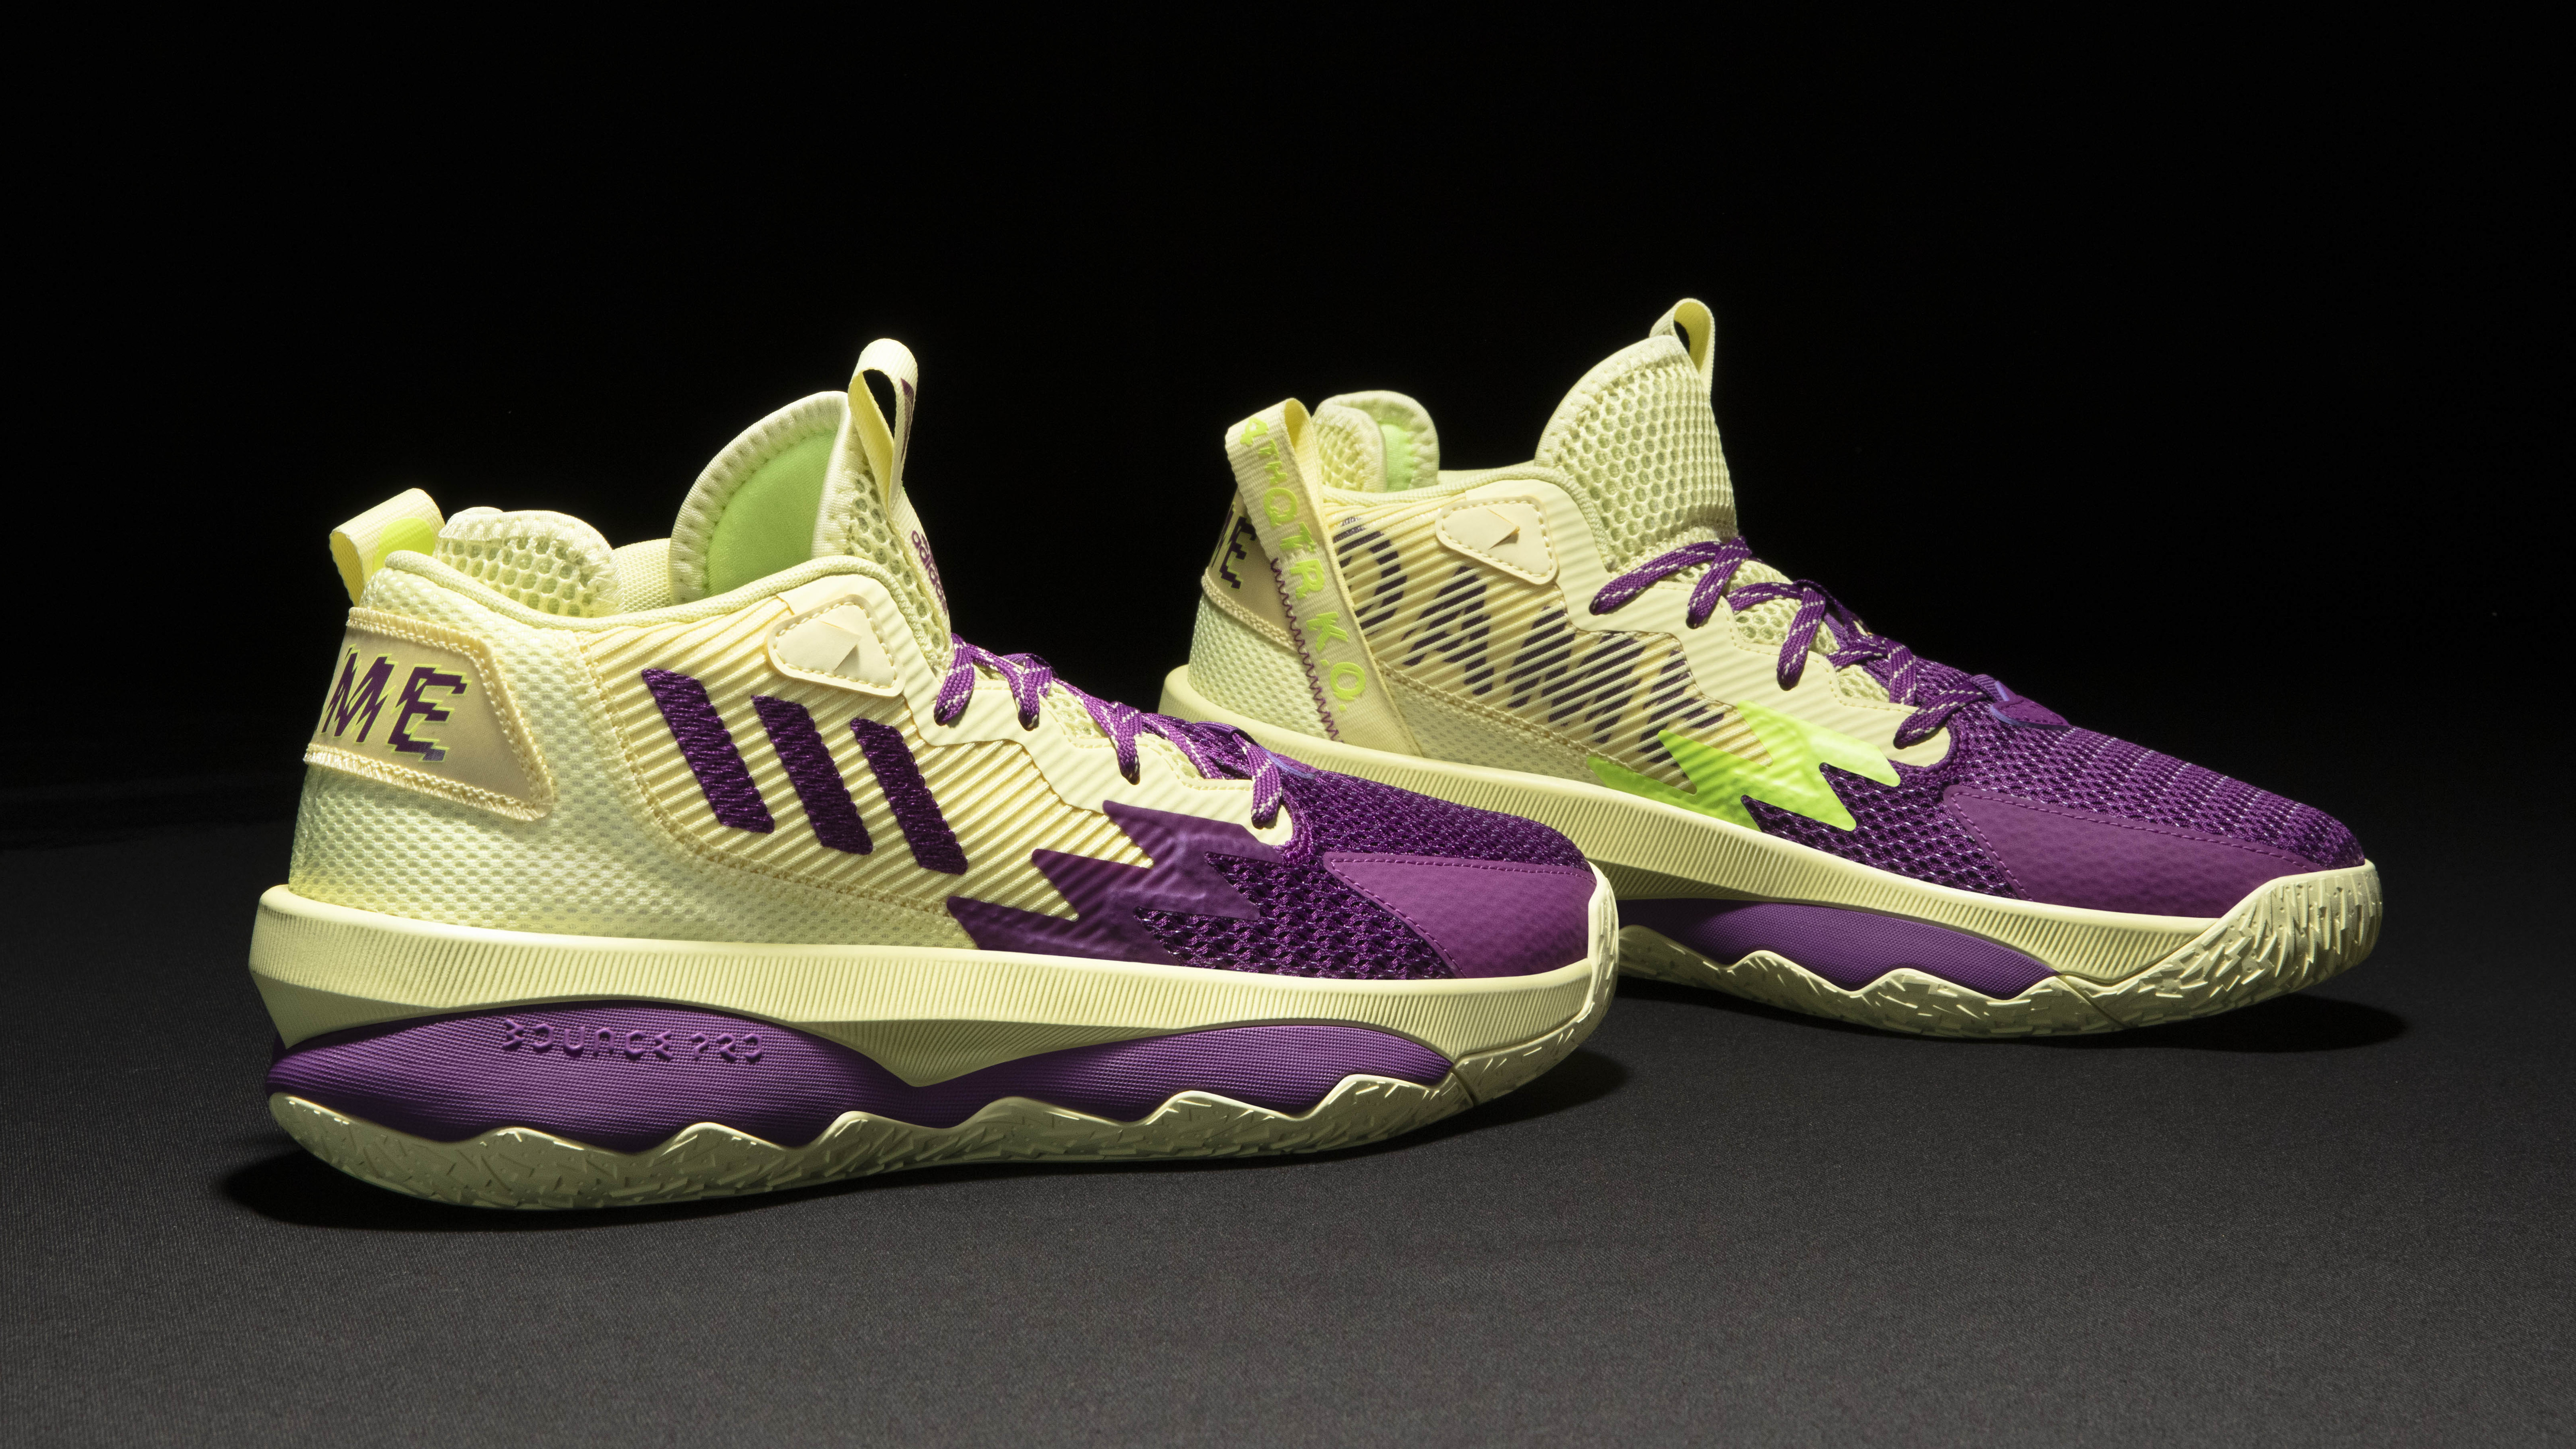 Damian Lillard Adidas Dame 8 Release Date GY0383 2021 | Sole Collector